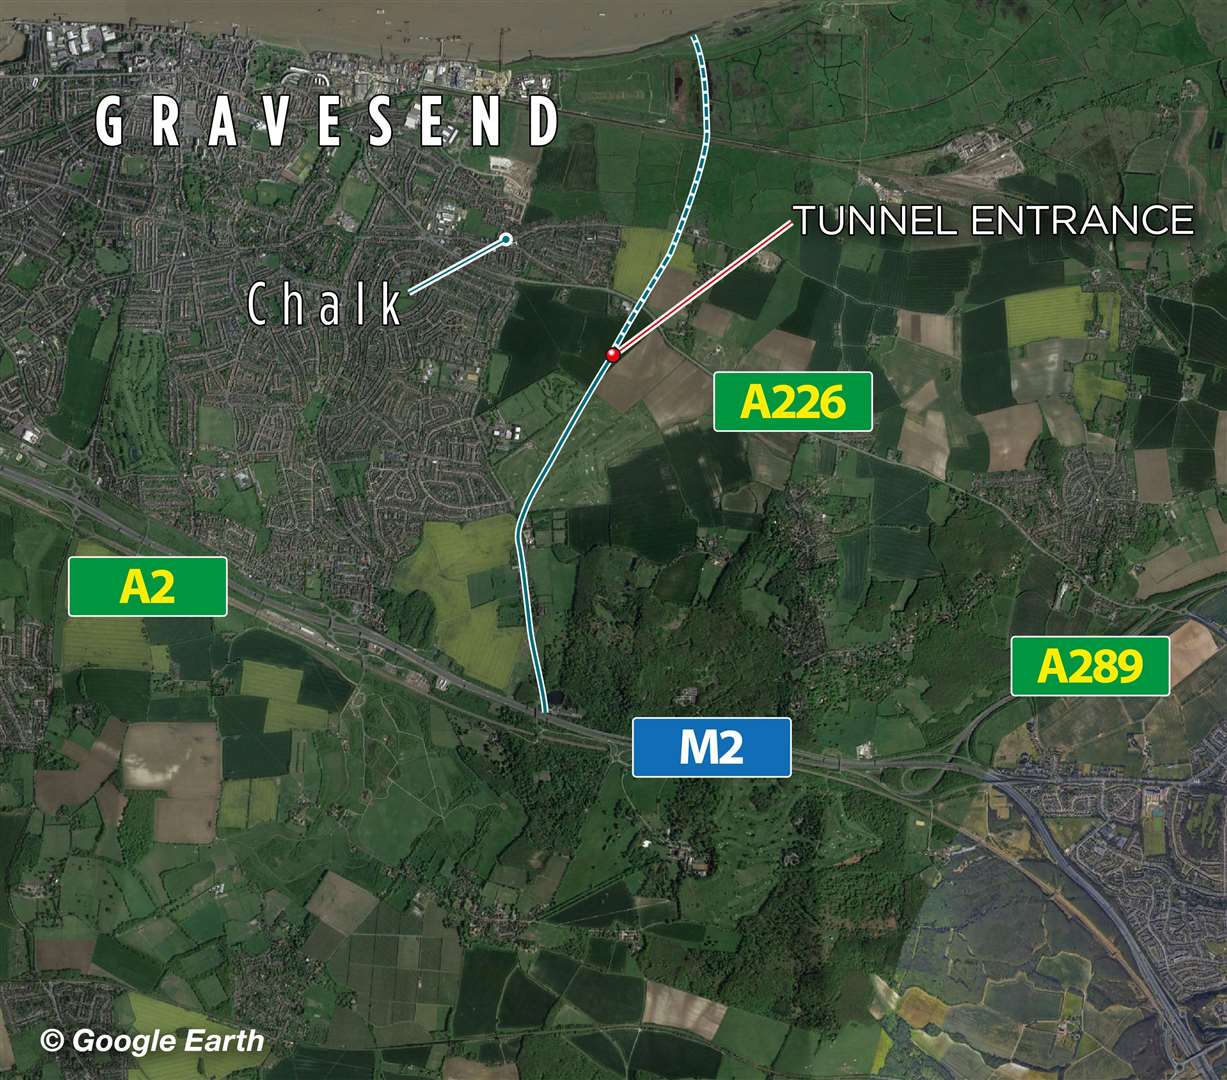 The updated planned route of the Lower Thames Crossing